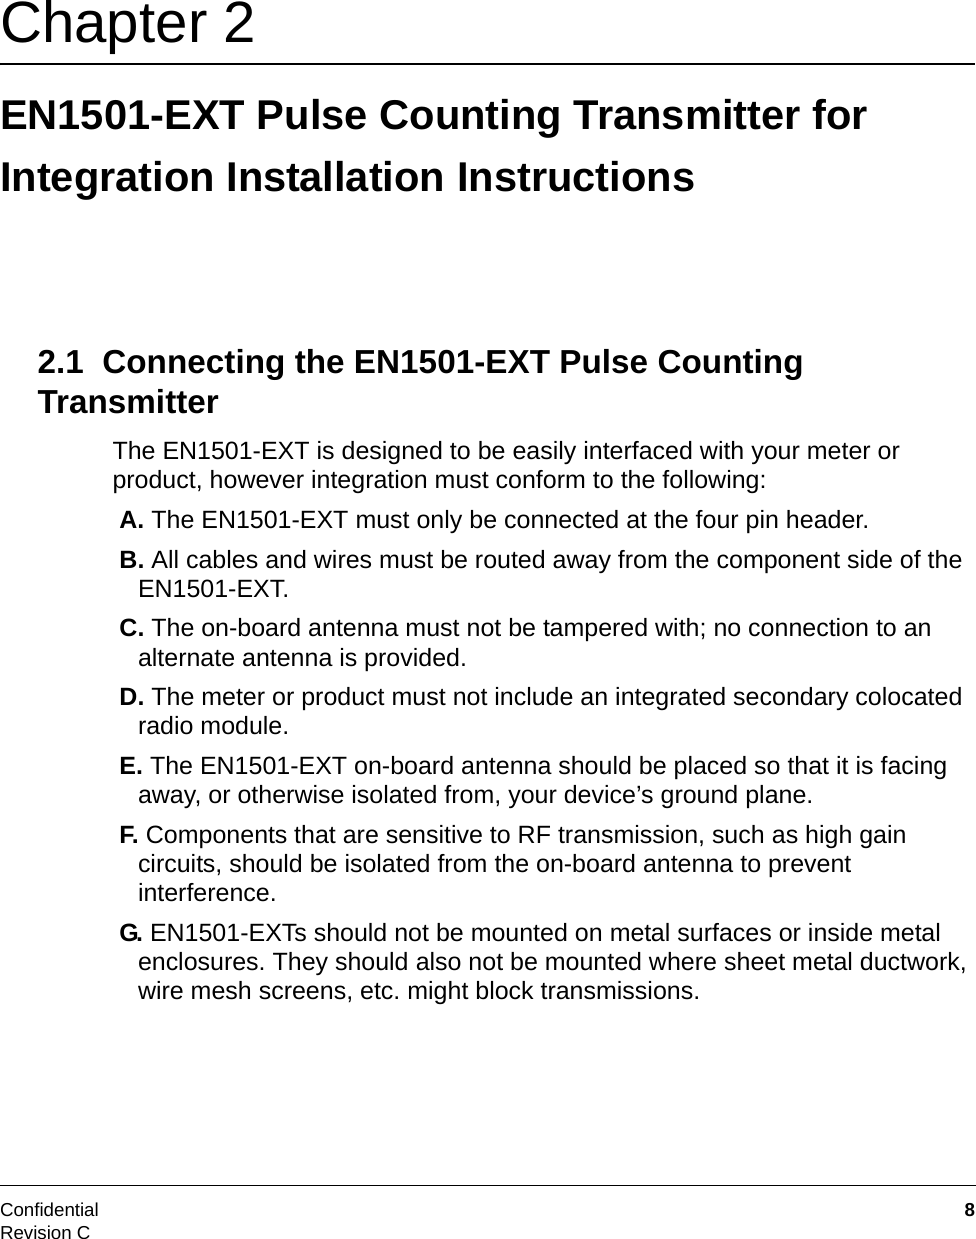 Confidential  8Revision CChapter 2 EN1501-EXT Pulse Counting Transmitter for Integration Installation Instructions2.1  Connecting the EN1501-EXT Pulse Counting TransmitterThe EN1501-EXT is designed to be easily interfaced with your meter or product, however integration must conform to the following: A. The EN1501-EXT must only be connected at the four pin header. B. All cables and wires must be routed away from the component side of the EN1501-EXT. C. The on-board antenna must not be tampered with; no connection to an alternate antenna is provided. D. The meter or product must not include an integrated secondary colocated radio module. E. The EN1501-EXT on-board antenna should be placed so that it is facing away, or otherwise isolated from, your device’s ground plane.  F. Components that are sensitive to RF transmission, such as high gain circuits, should be isolated from the on-board antenna to prevent interference. G. EN1501-EXTs should not be mounted on metal surfaces or inside metal enclosures. They should also not be mounted where sheet metal ductwork, wire mesh screens, etc. might block transmissions.